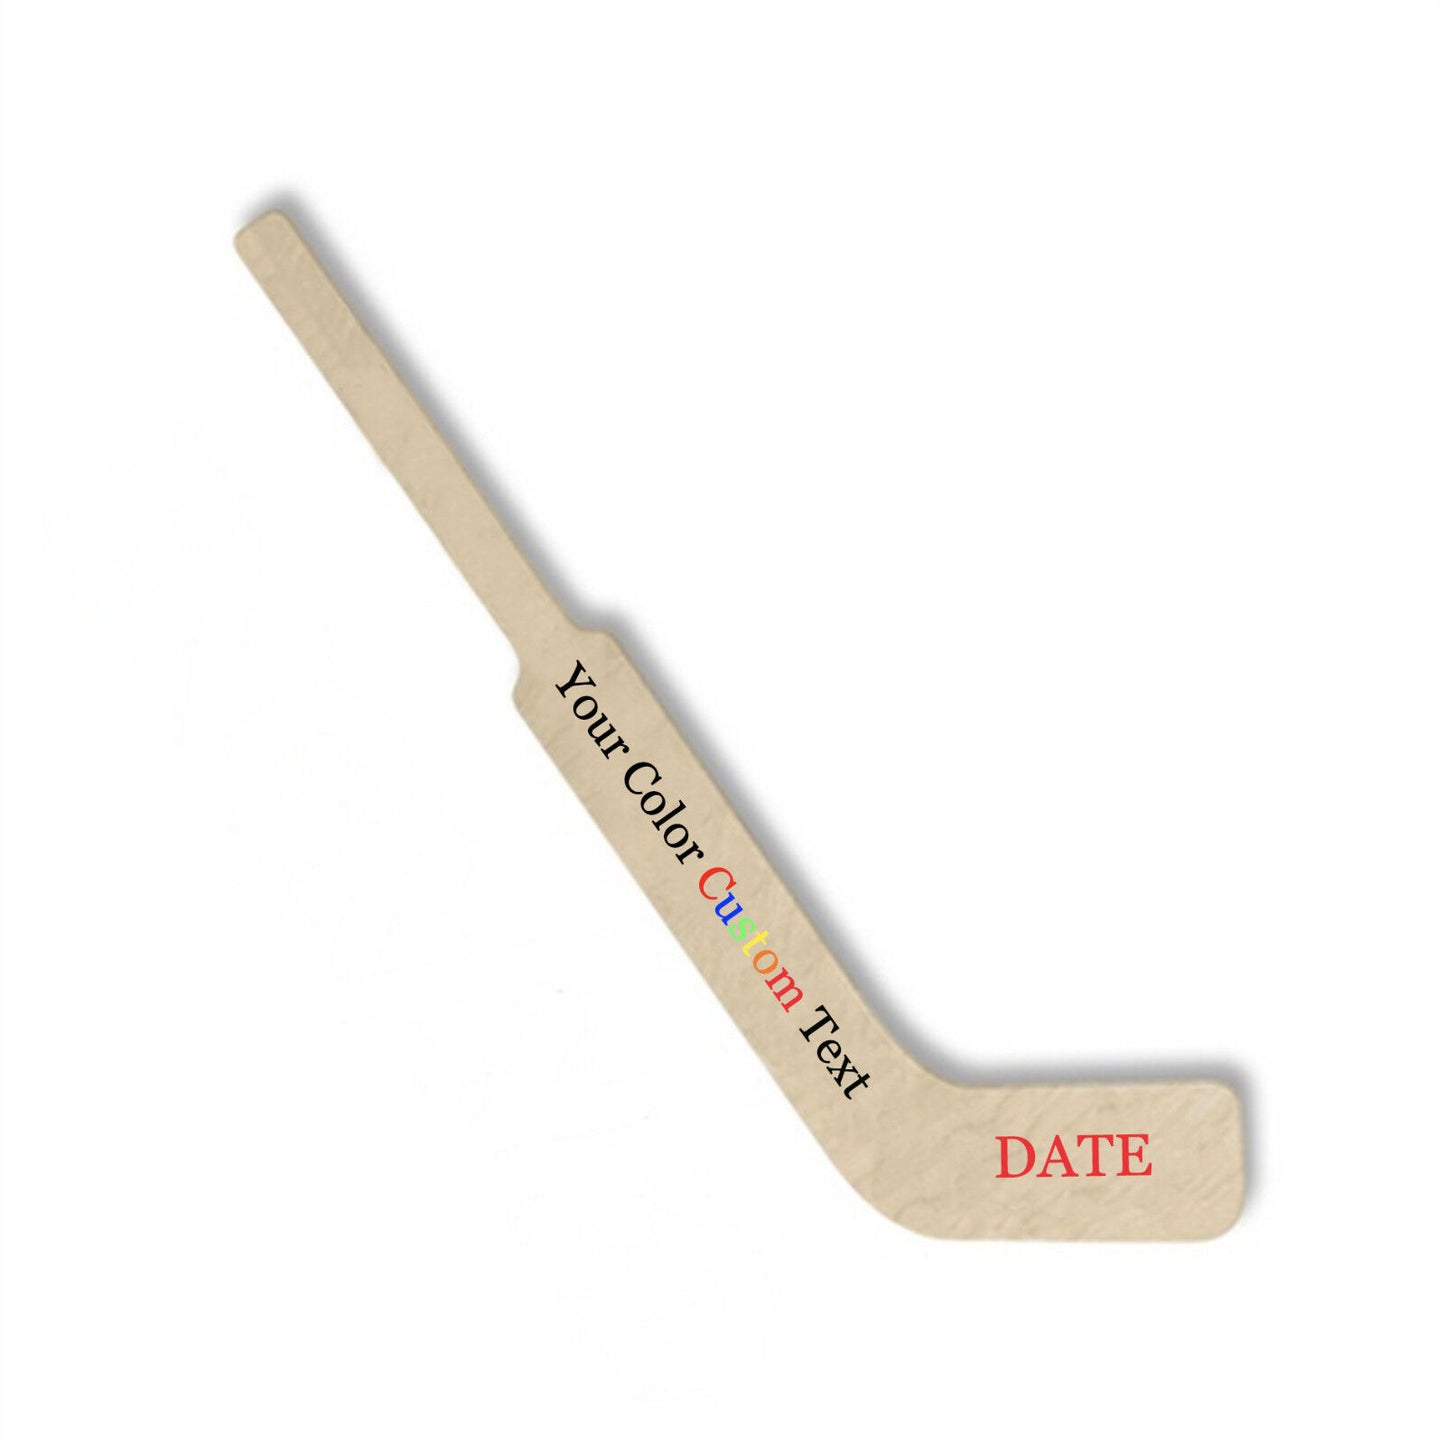 Customized Engraved OR Color Printed 12 Inch Mini Toy Hockey Stick - Add Your Text - Choose from Regular or Goalie Stick